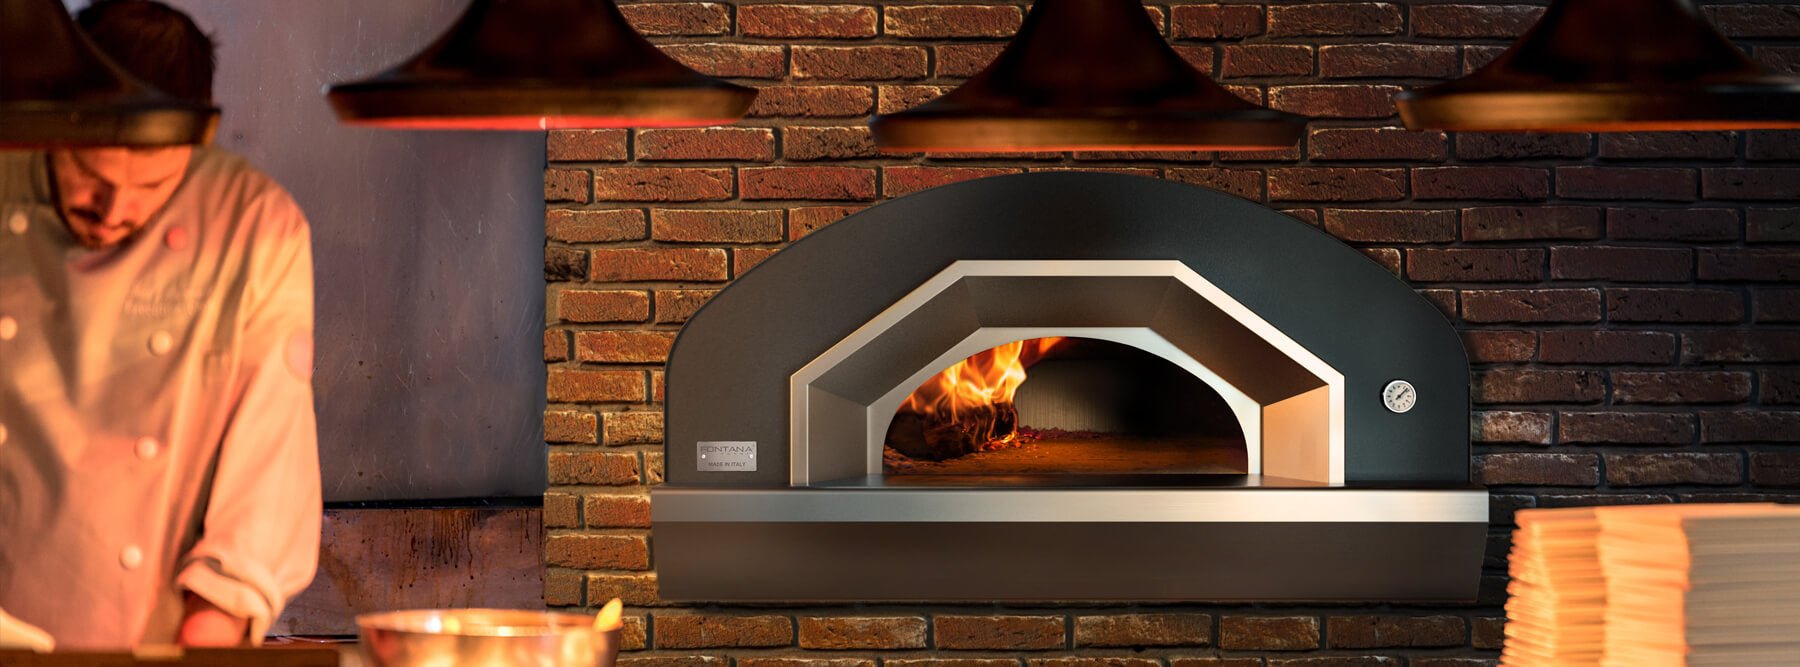 Commercial Pizza Ovens Restaurant Wood Fired Pizza Ovens